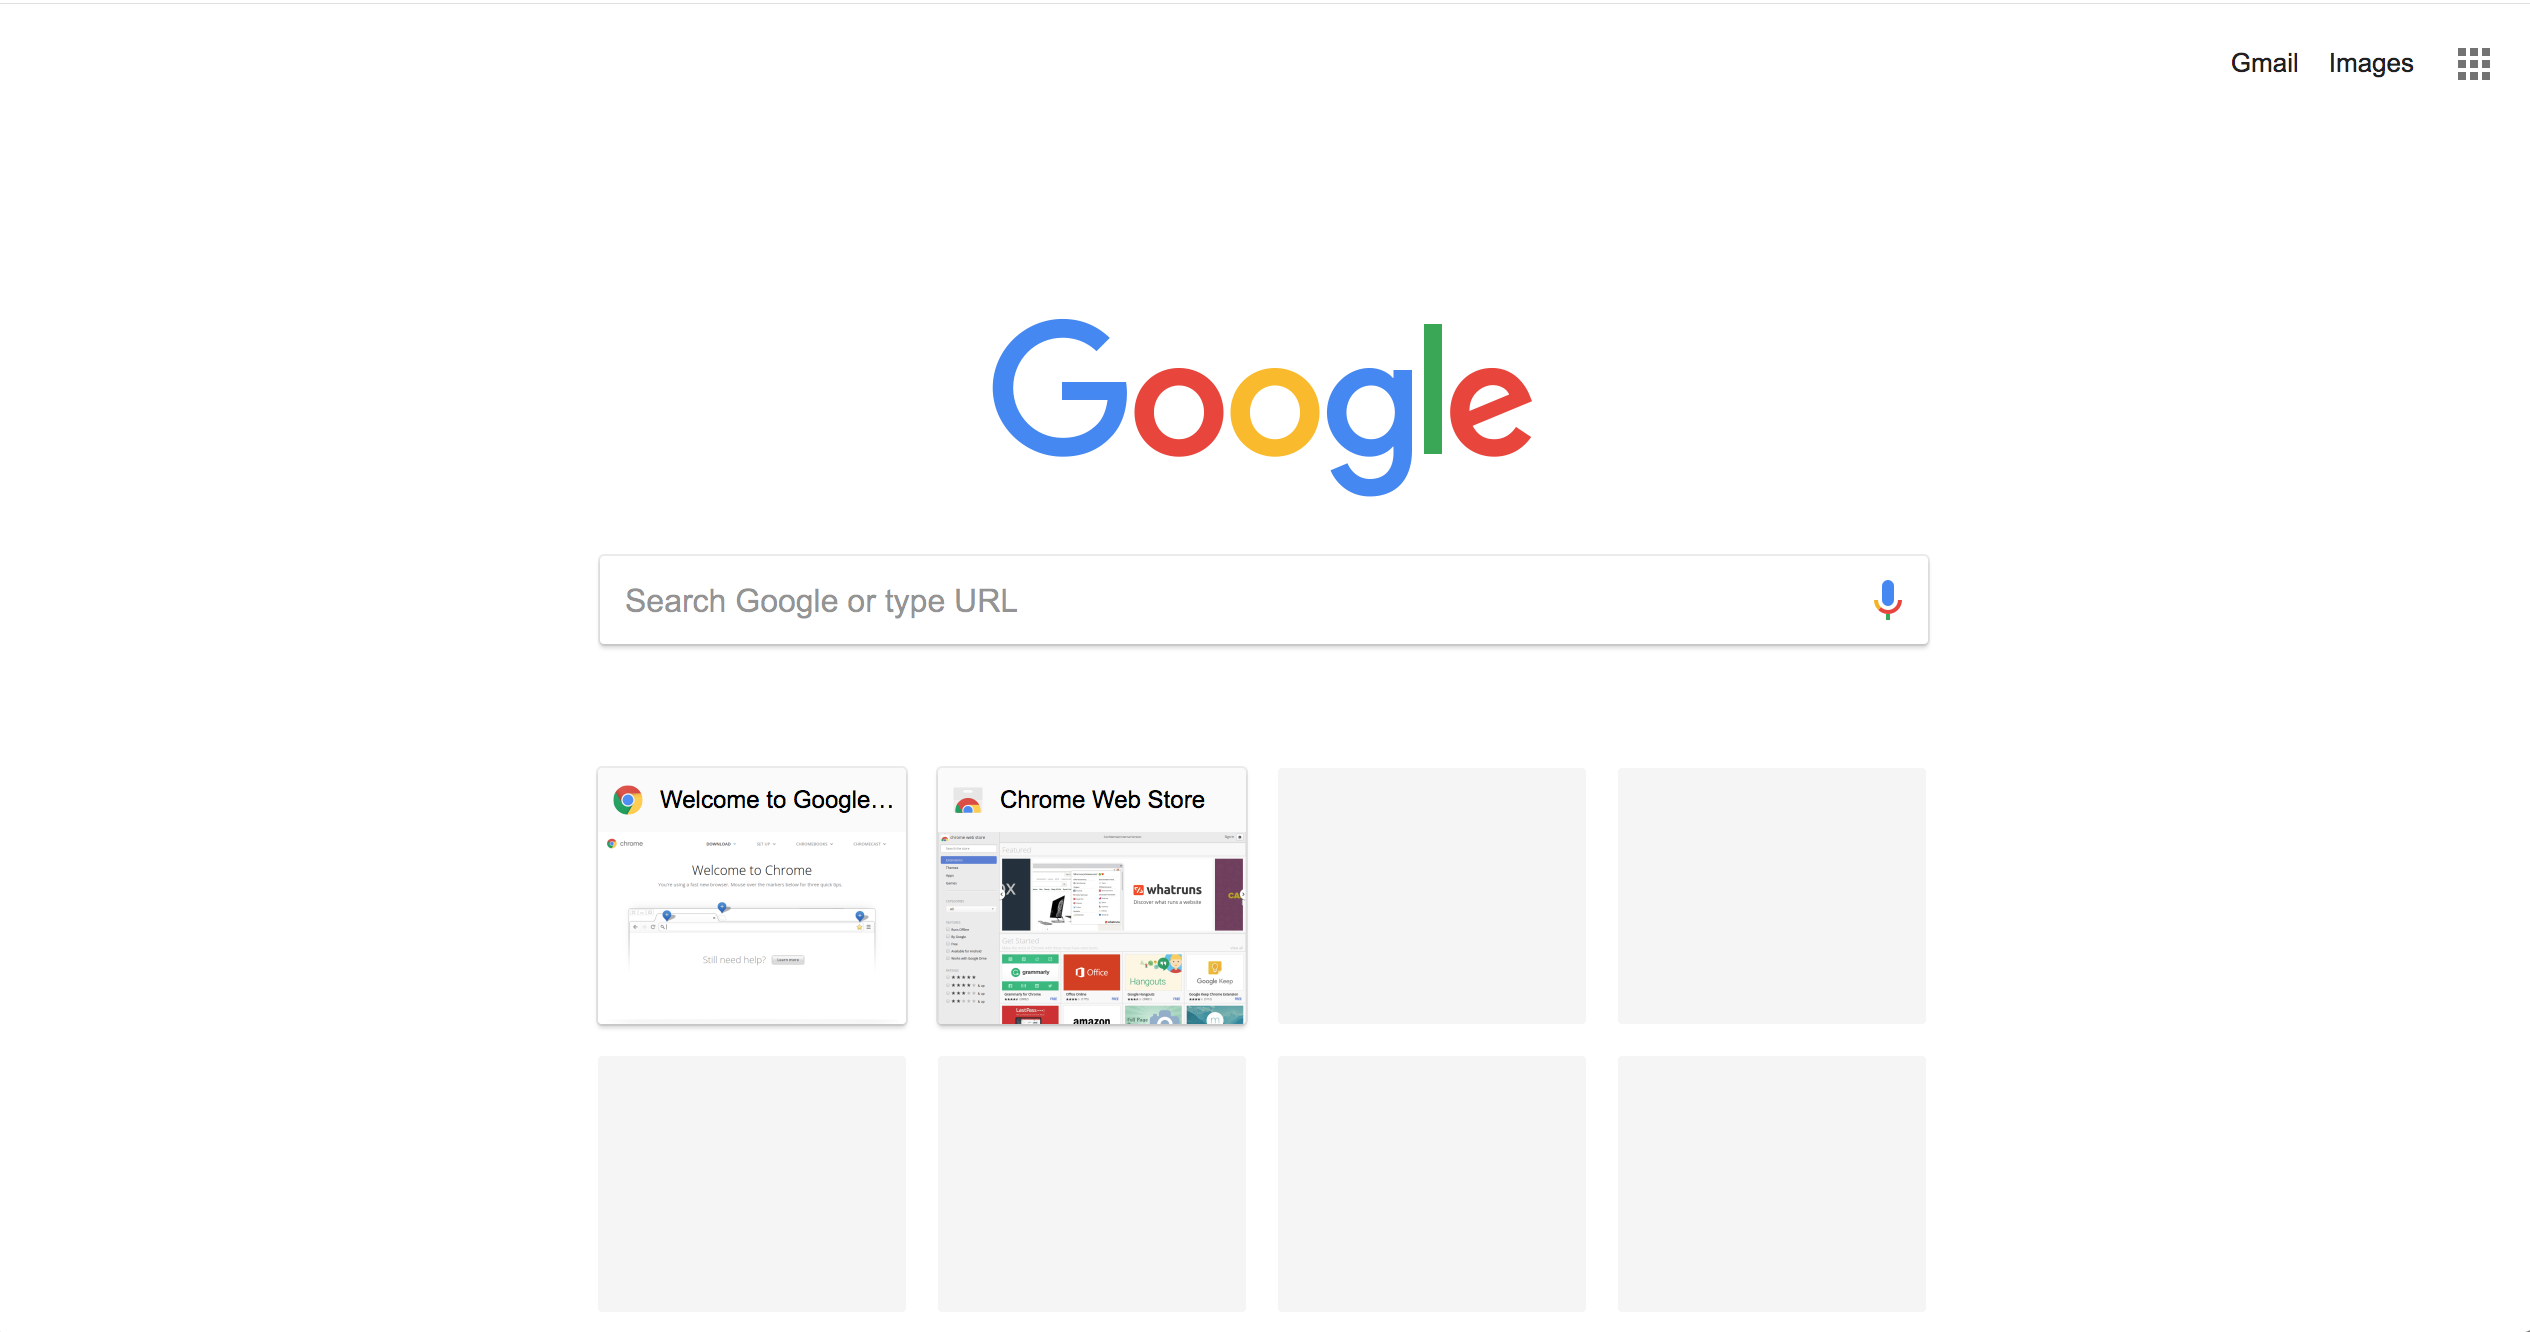 an image of the Google search screen